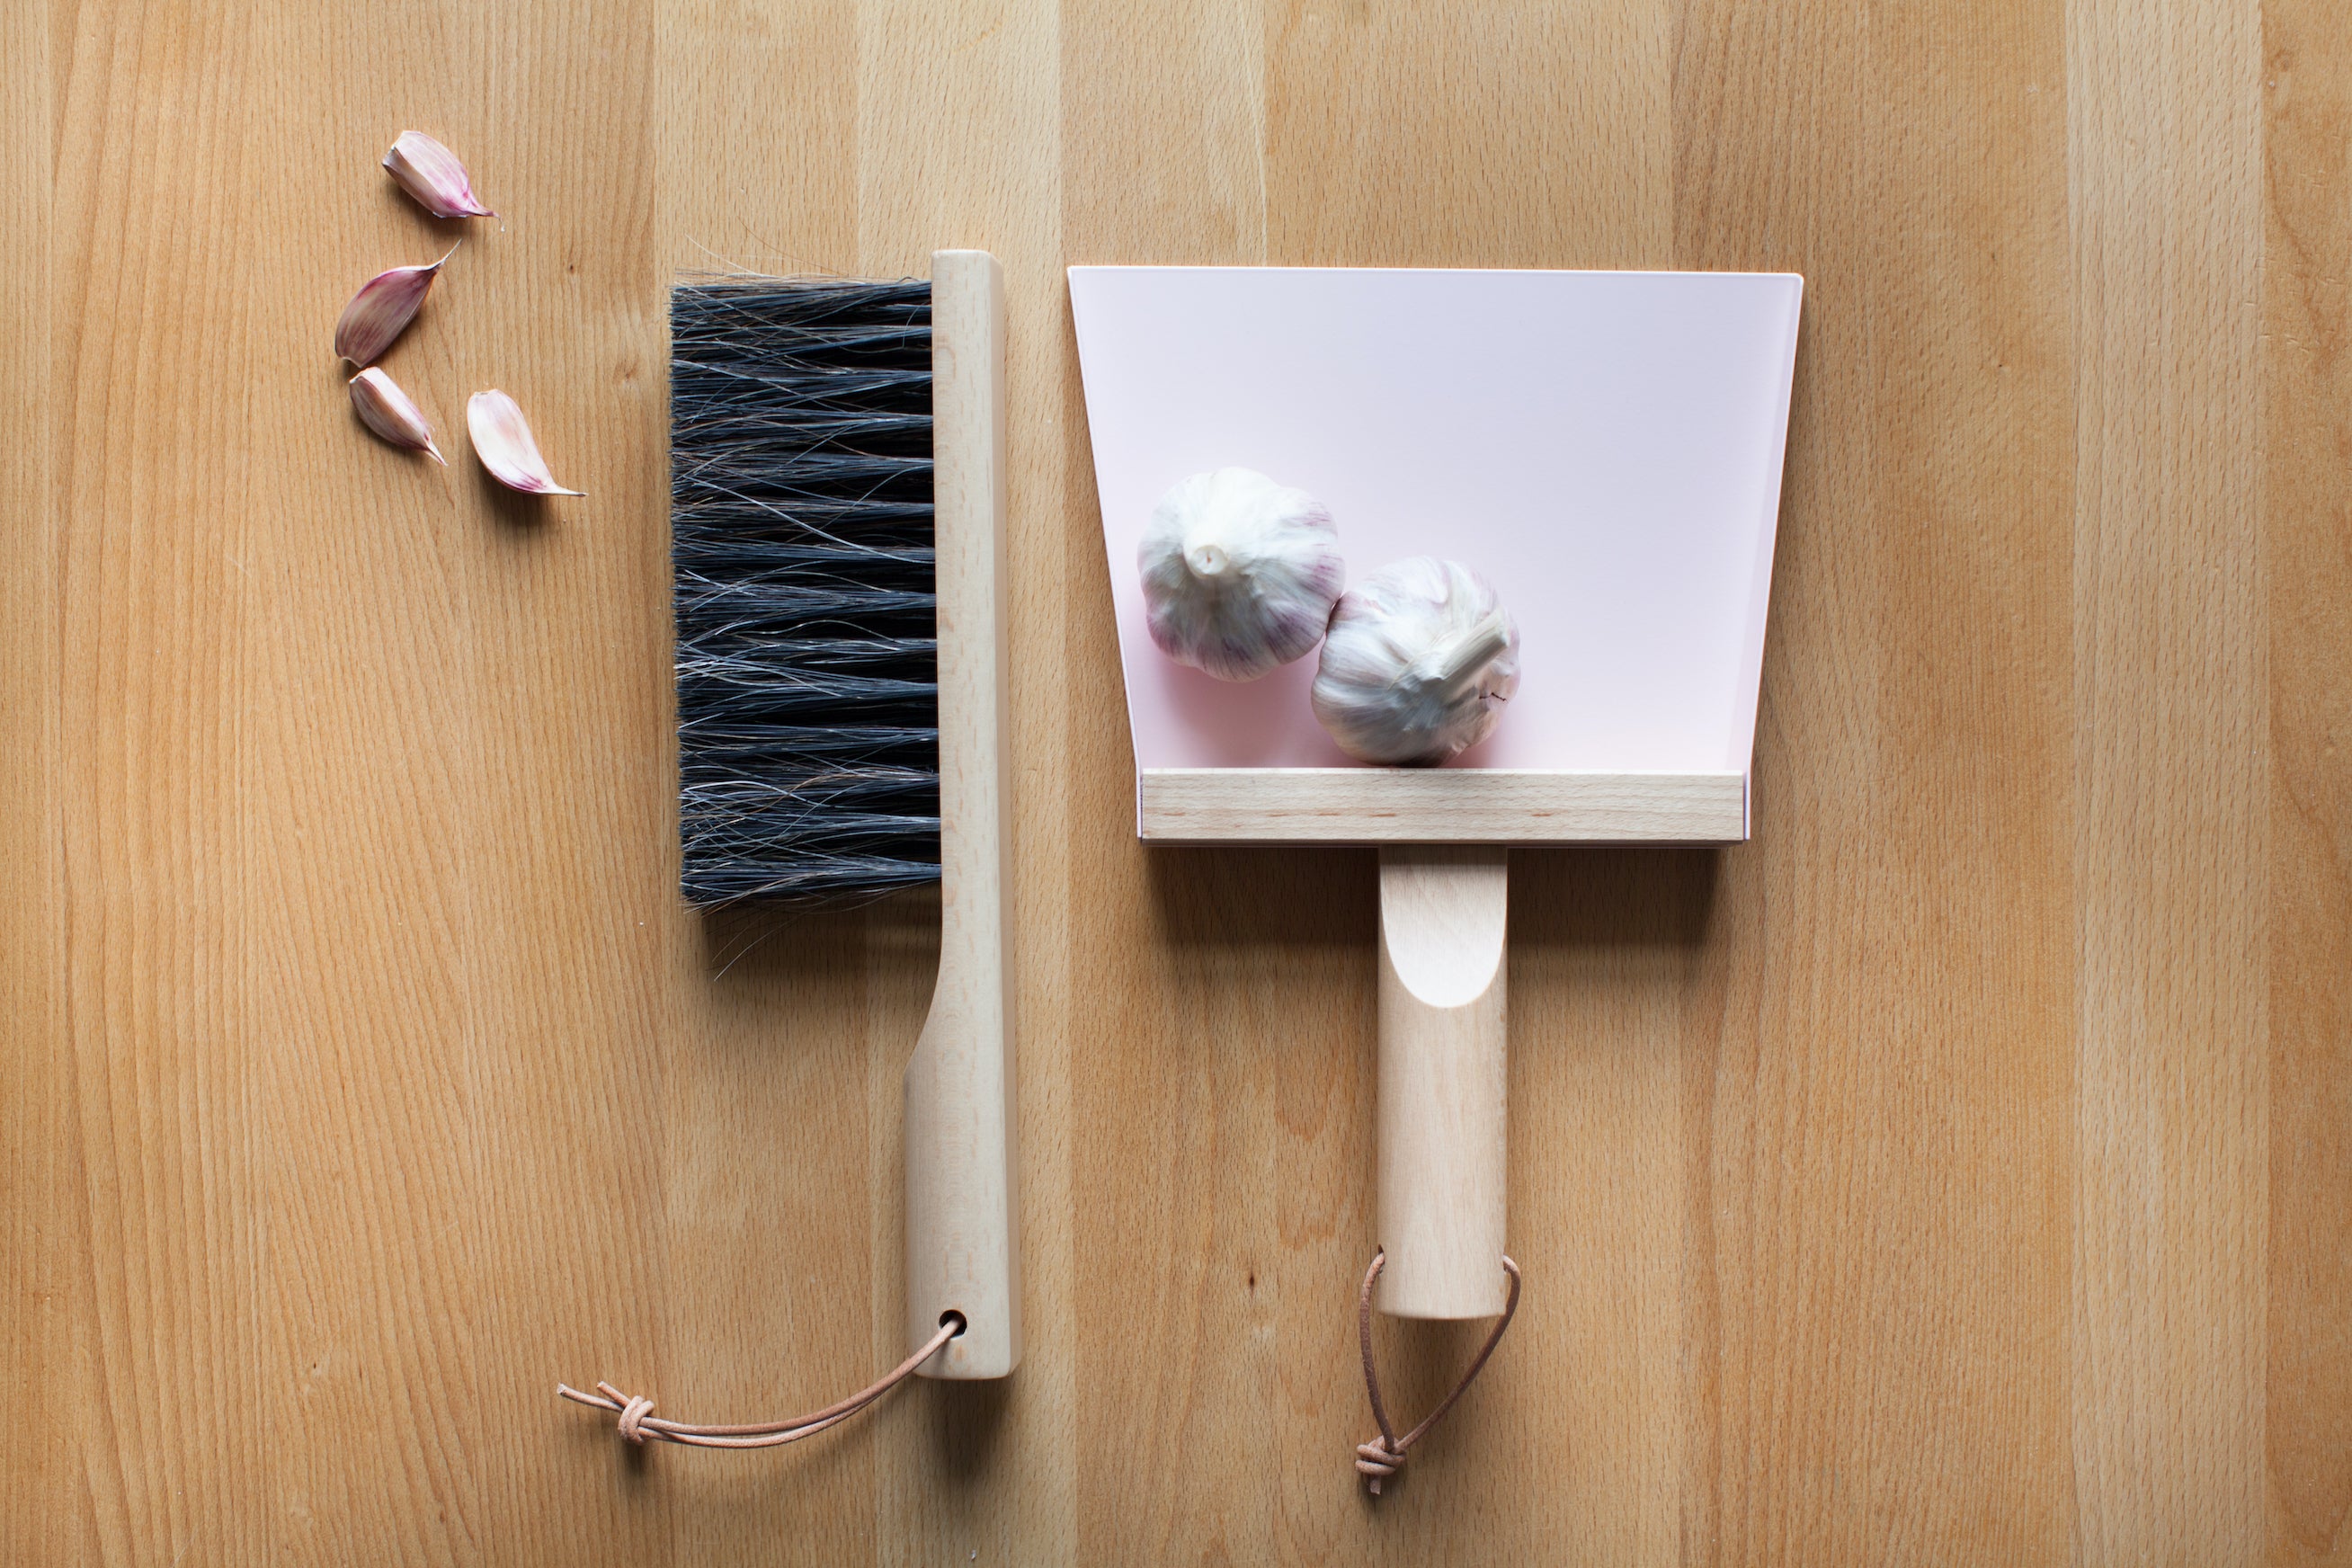 Andrée Jardin Mr. and Mrs. Clynk Dustpan & Brush "Coffret" Gift Set with Wall Hooks Utilities Andrée Jardin Brand_Andrée Jardin Home_Broom Sets Home_Household Cleaning New Arrivals AndreeJardinMr.andMrs.ClynkLightPinkDustpan_BrushCoffretGiftSet_2